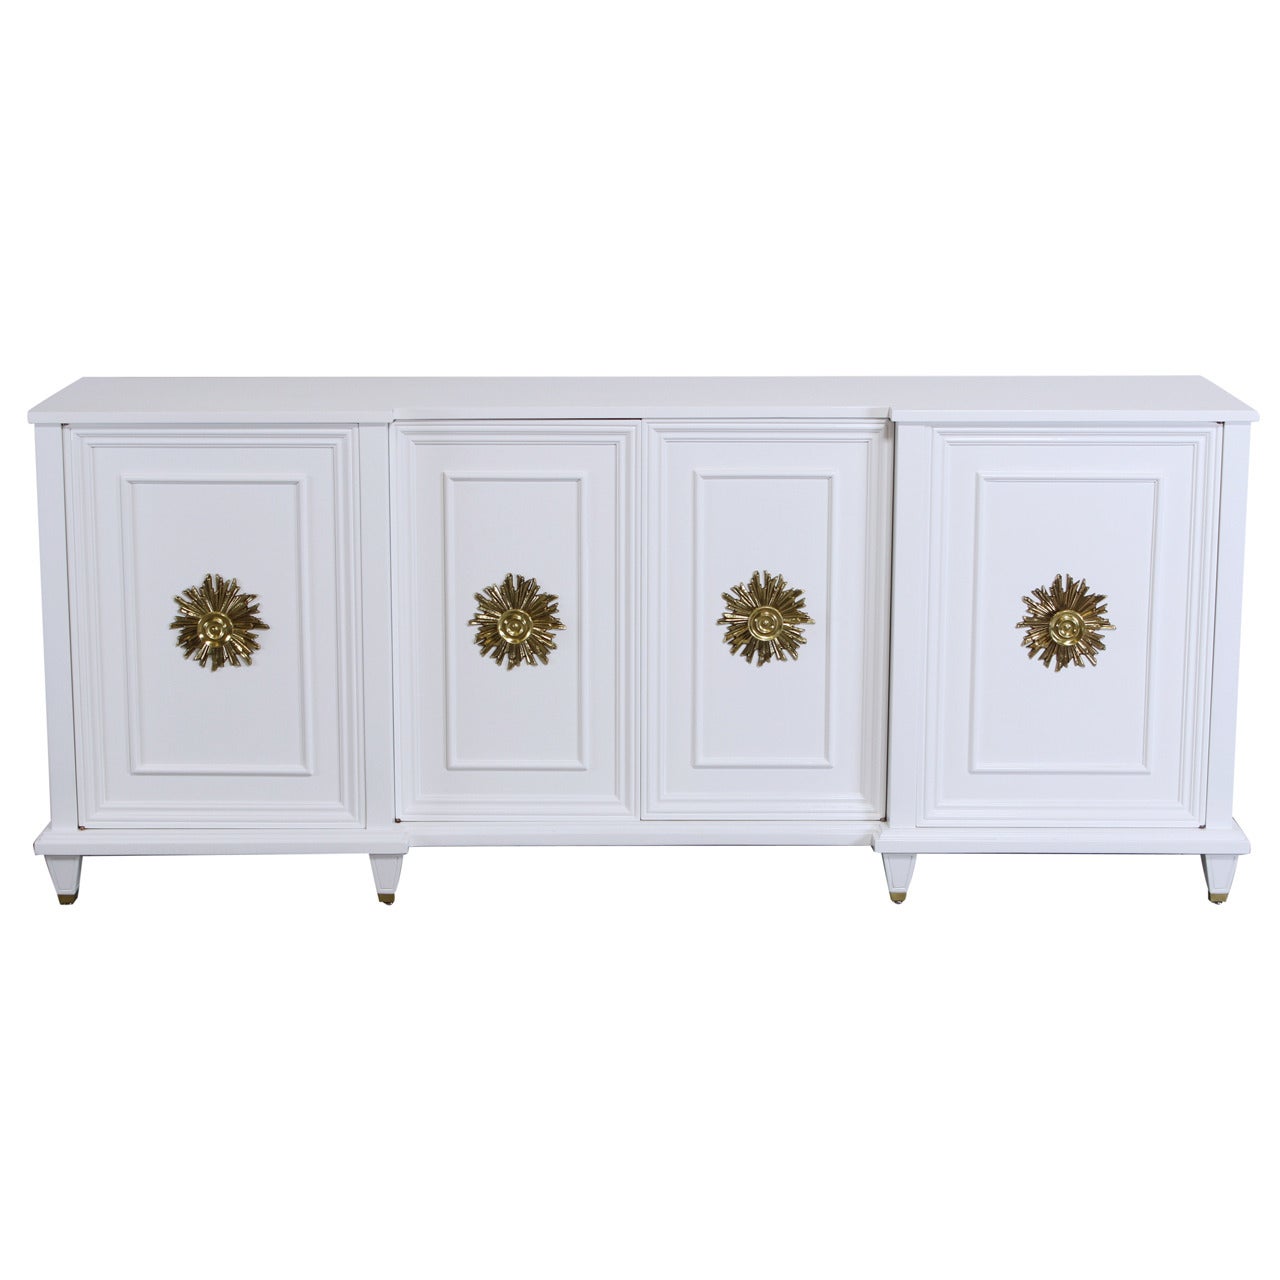 Hollywood Regency Credenza in the Style of Maison Jansen